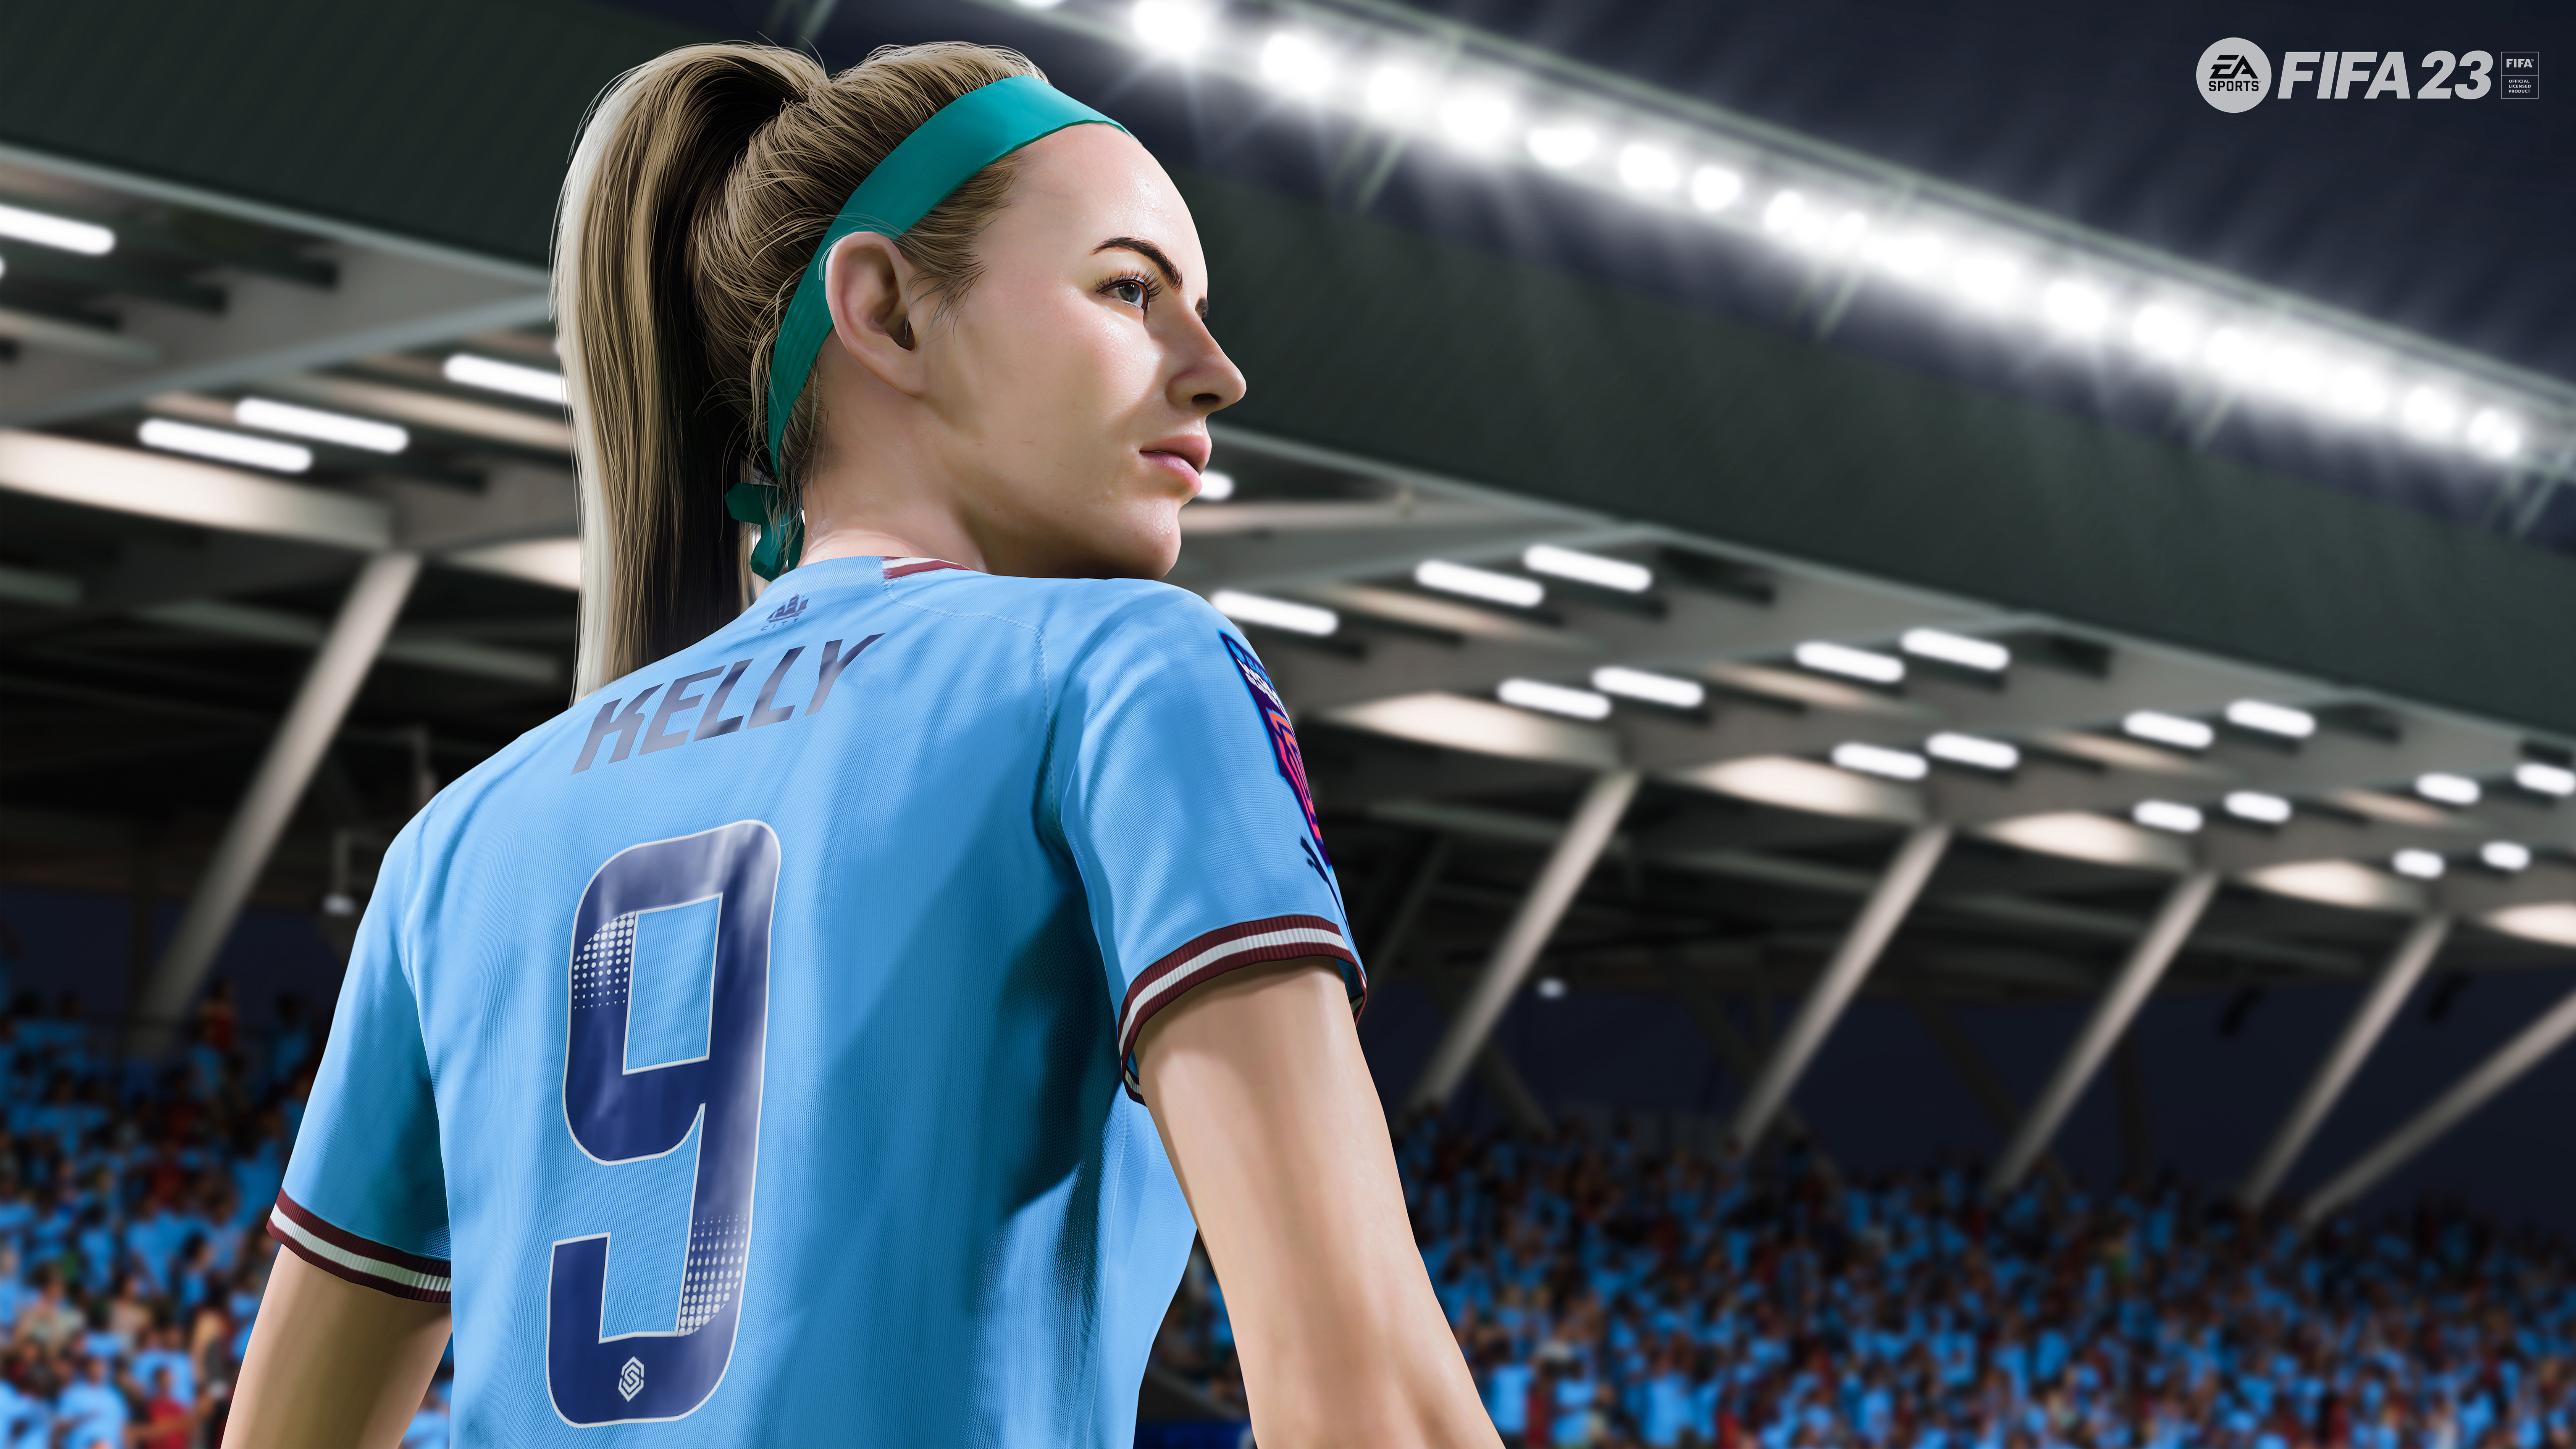 Web App FIFA 23: The Ultimate Guide for Tech Enthusiasts